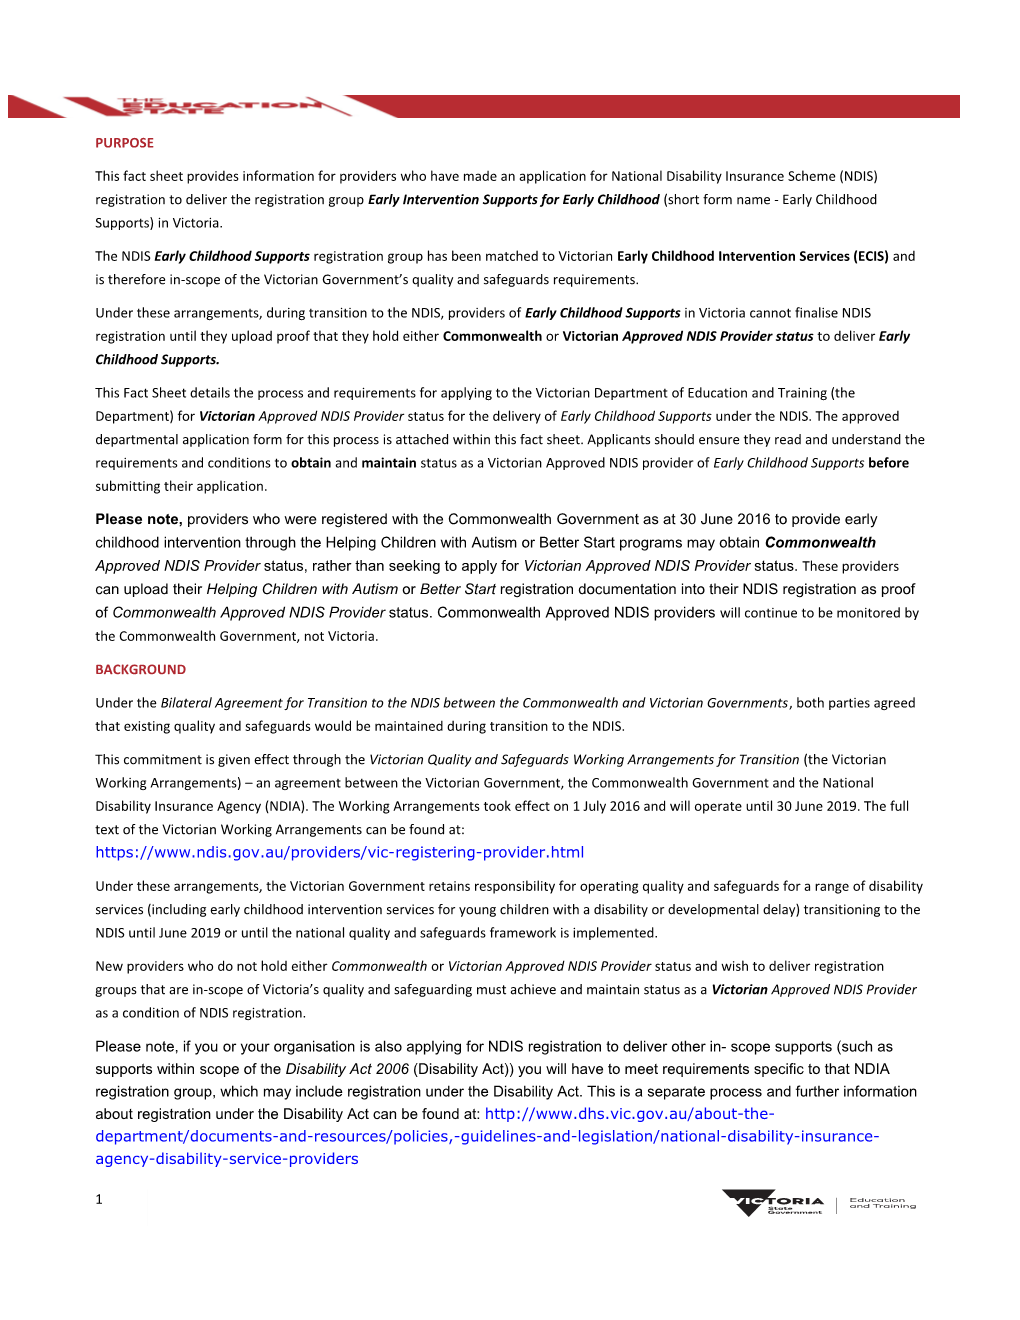 Fact Sheet Applying for Vic Approved NDIS ECS Provider Status